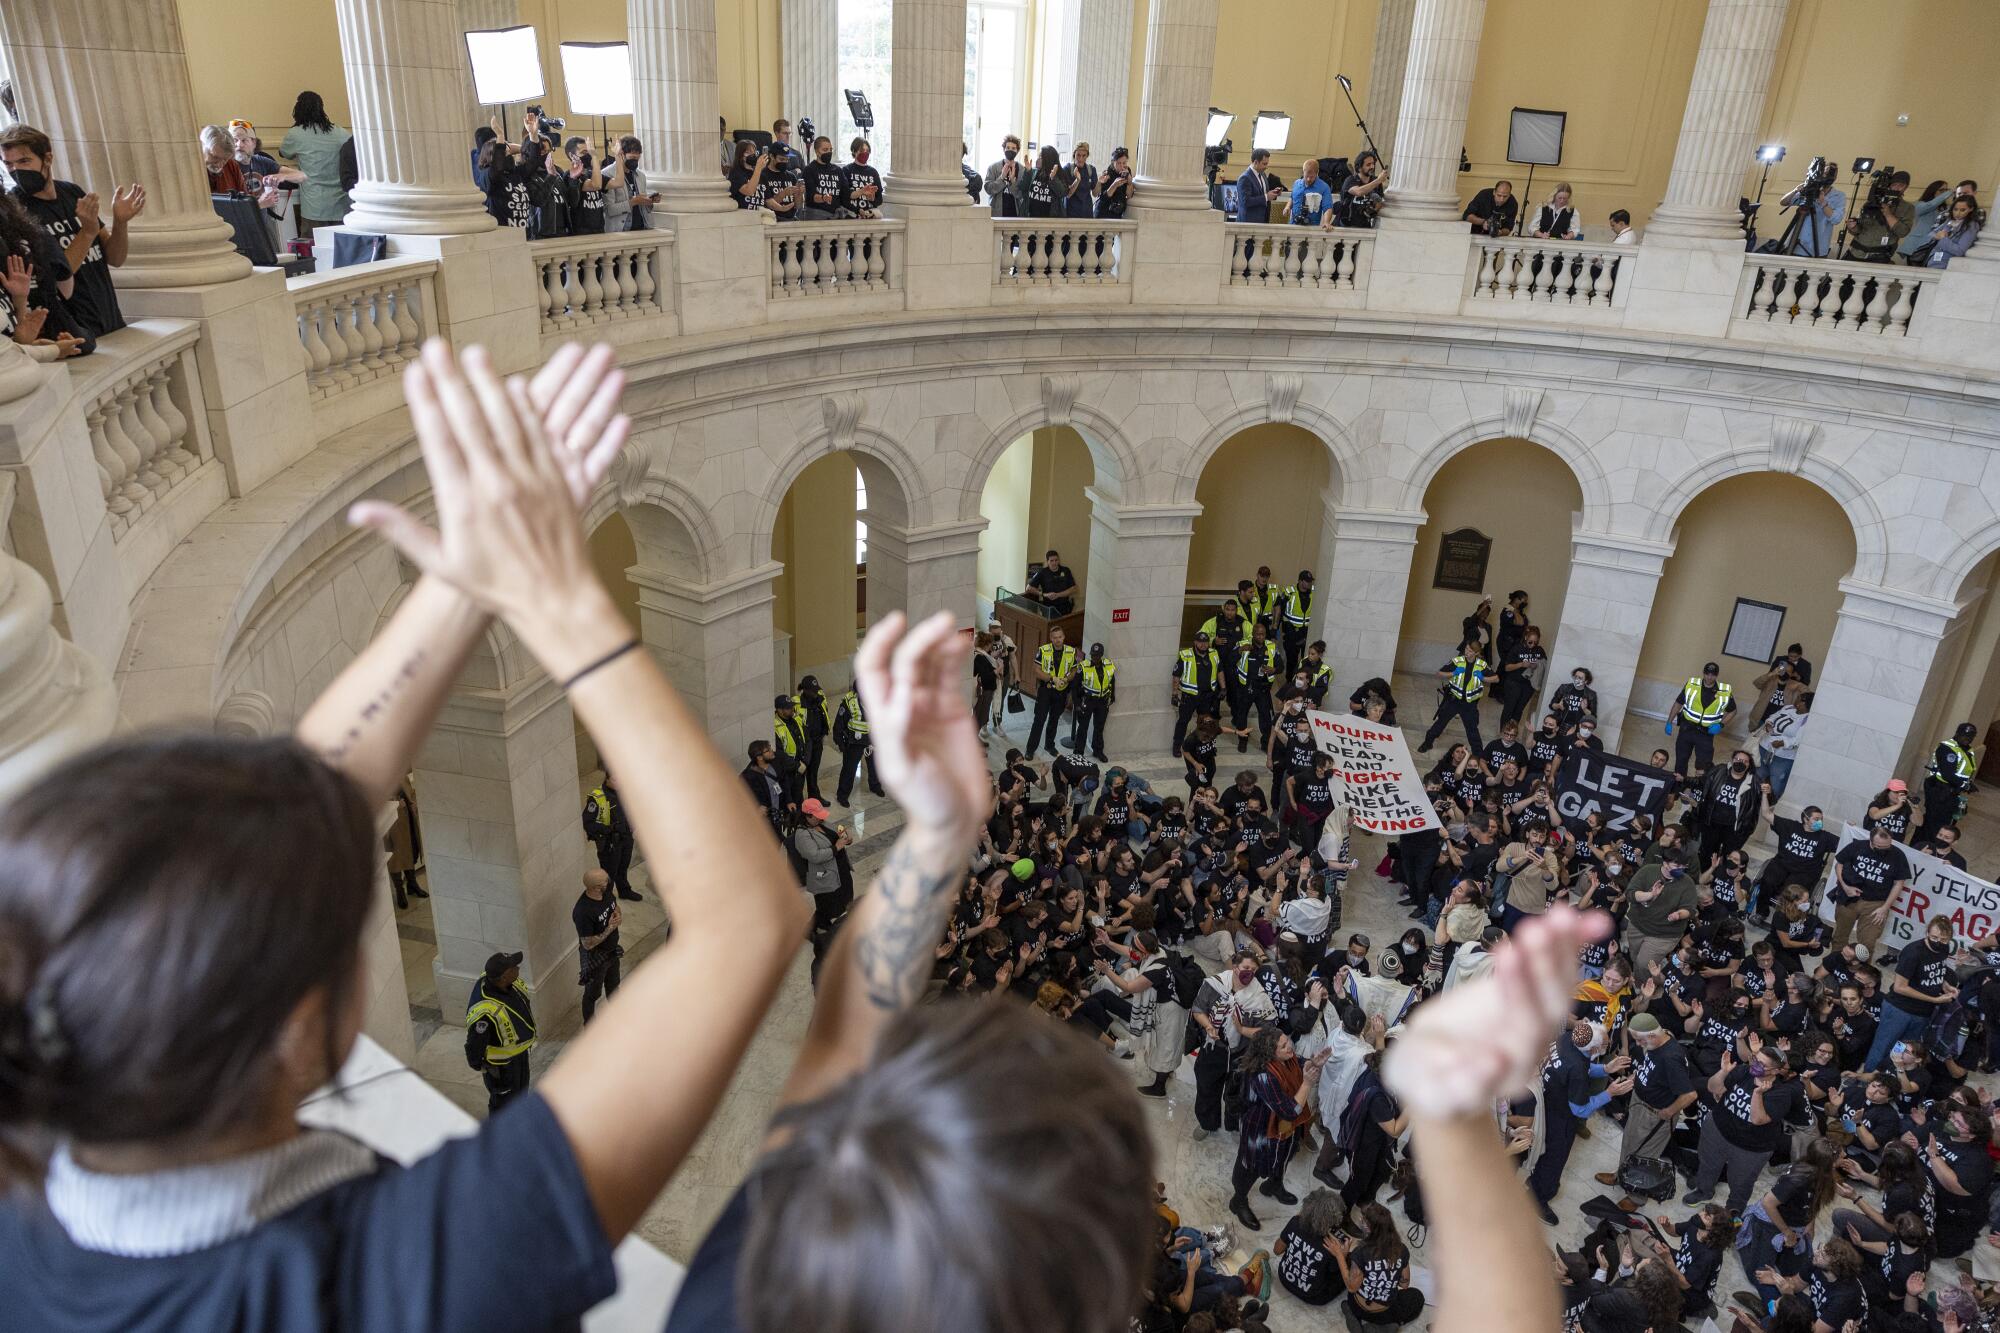 People of hold up their hands in a rotunda with white pillars and balustrades